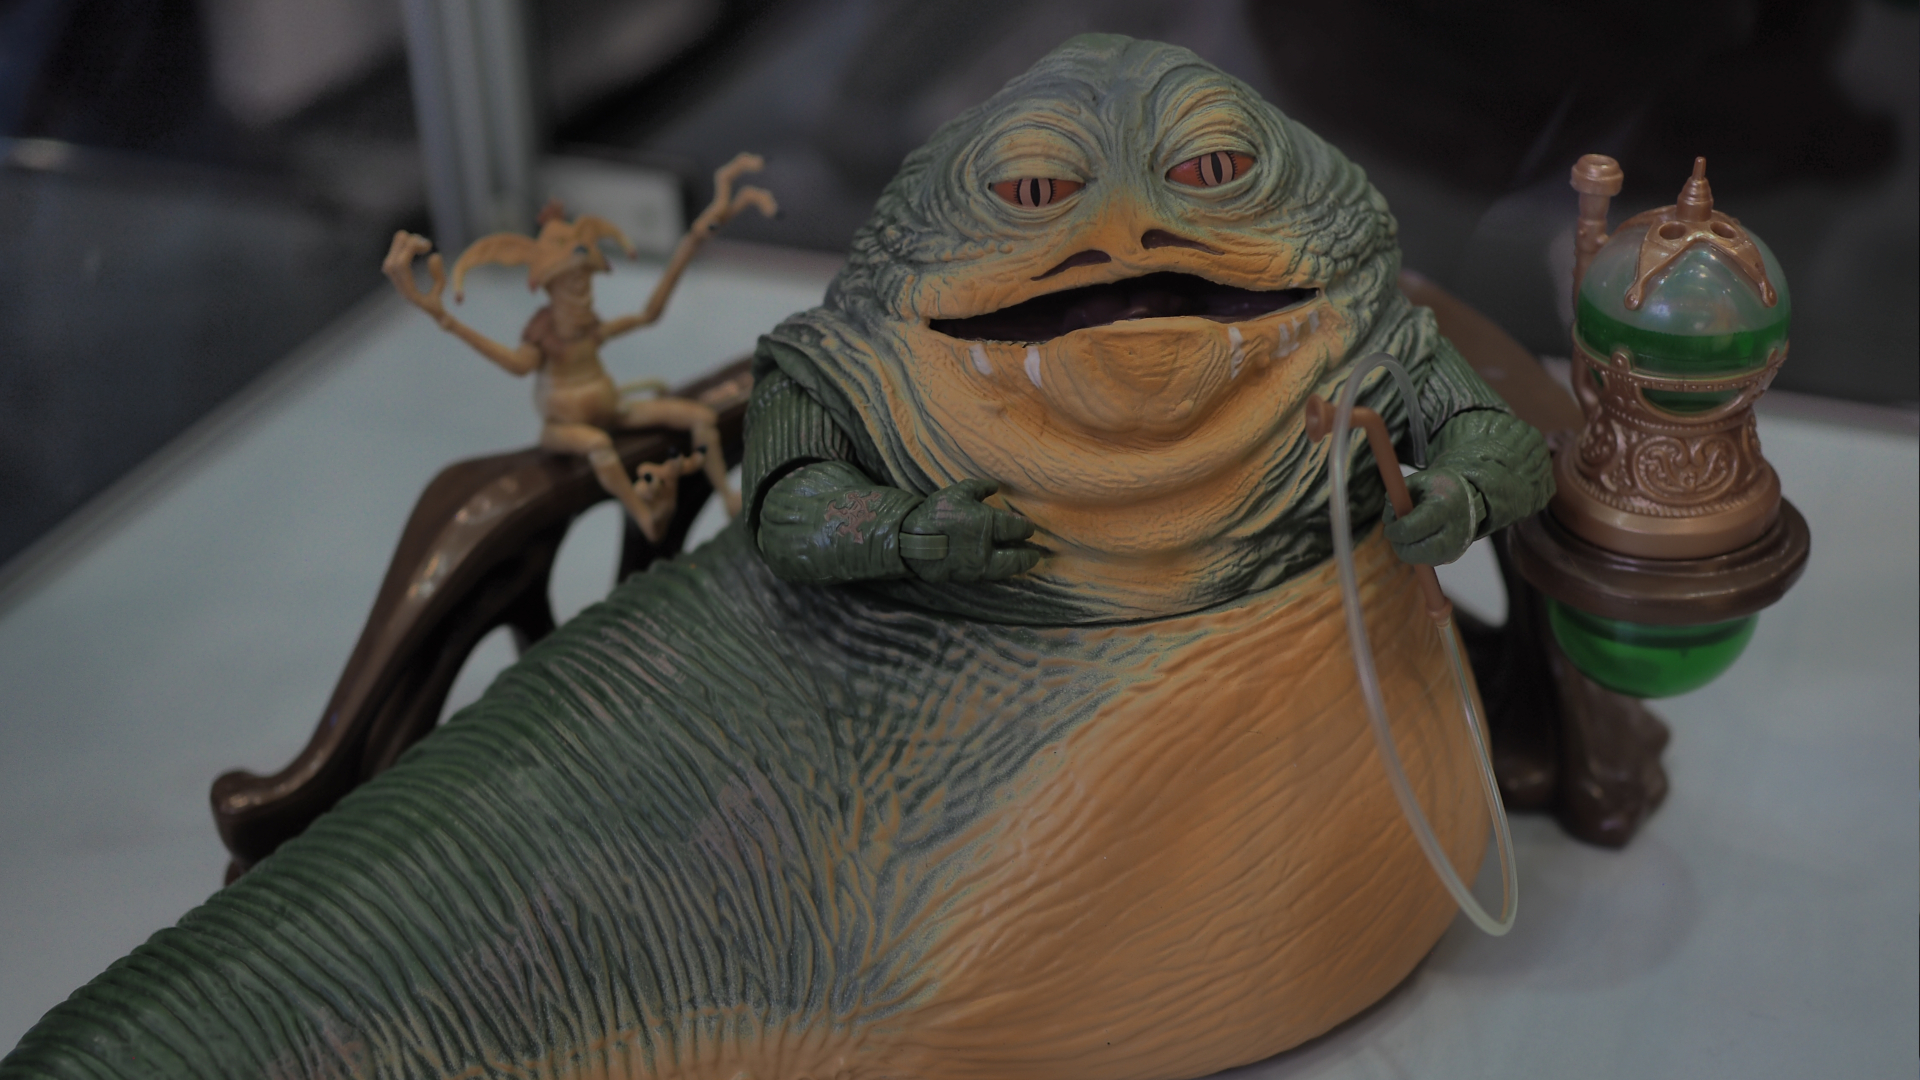 An action figure of Jabba sits on a plain surface